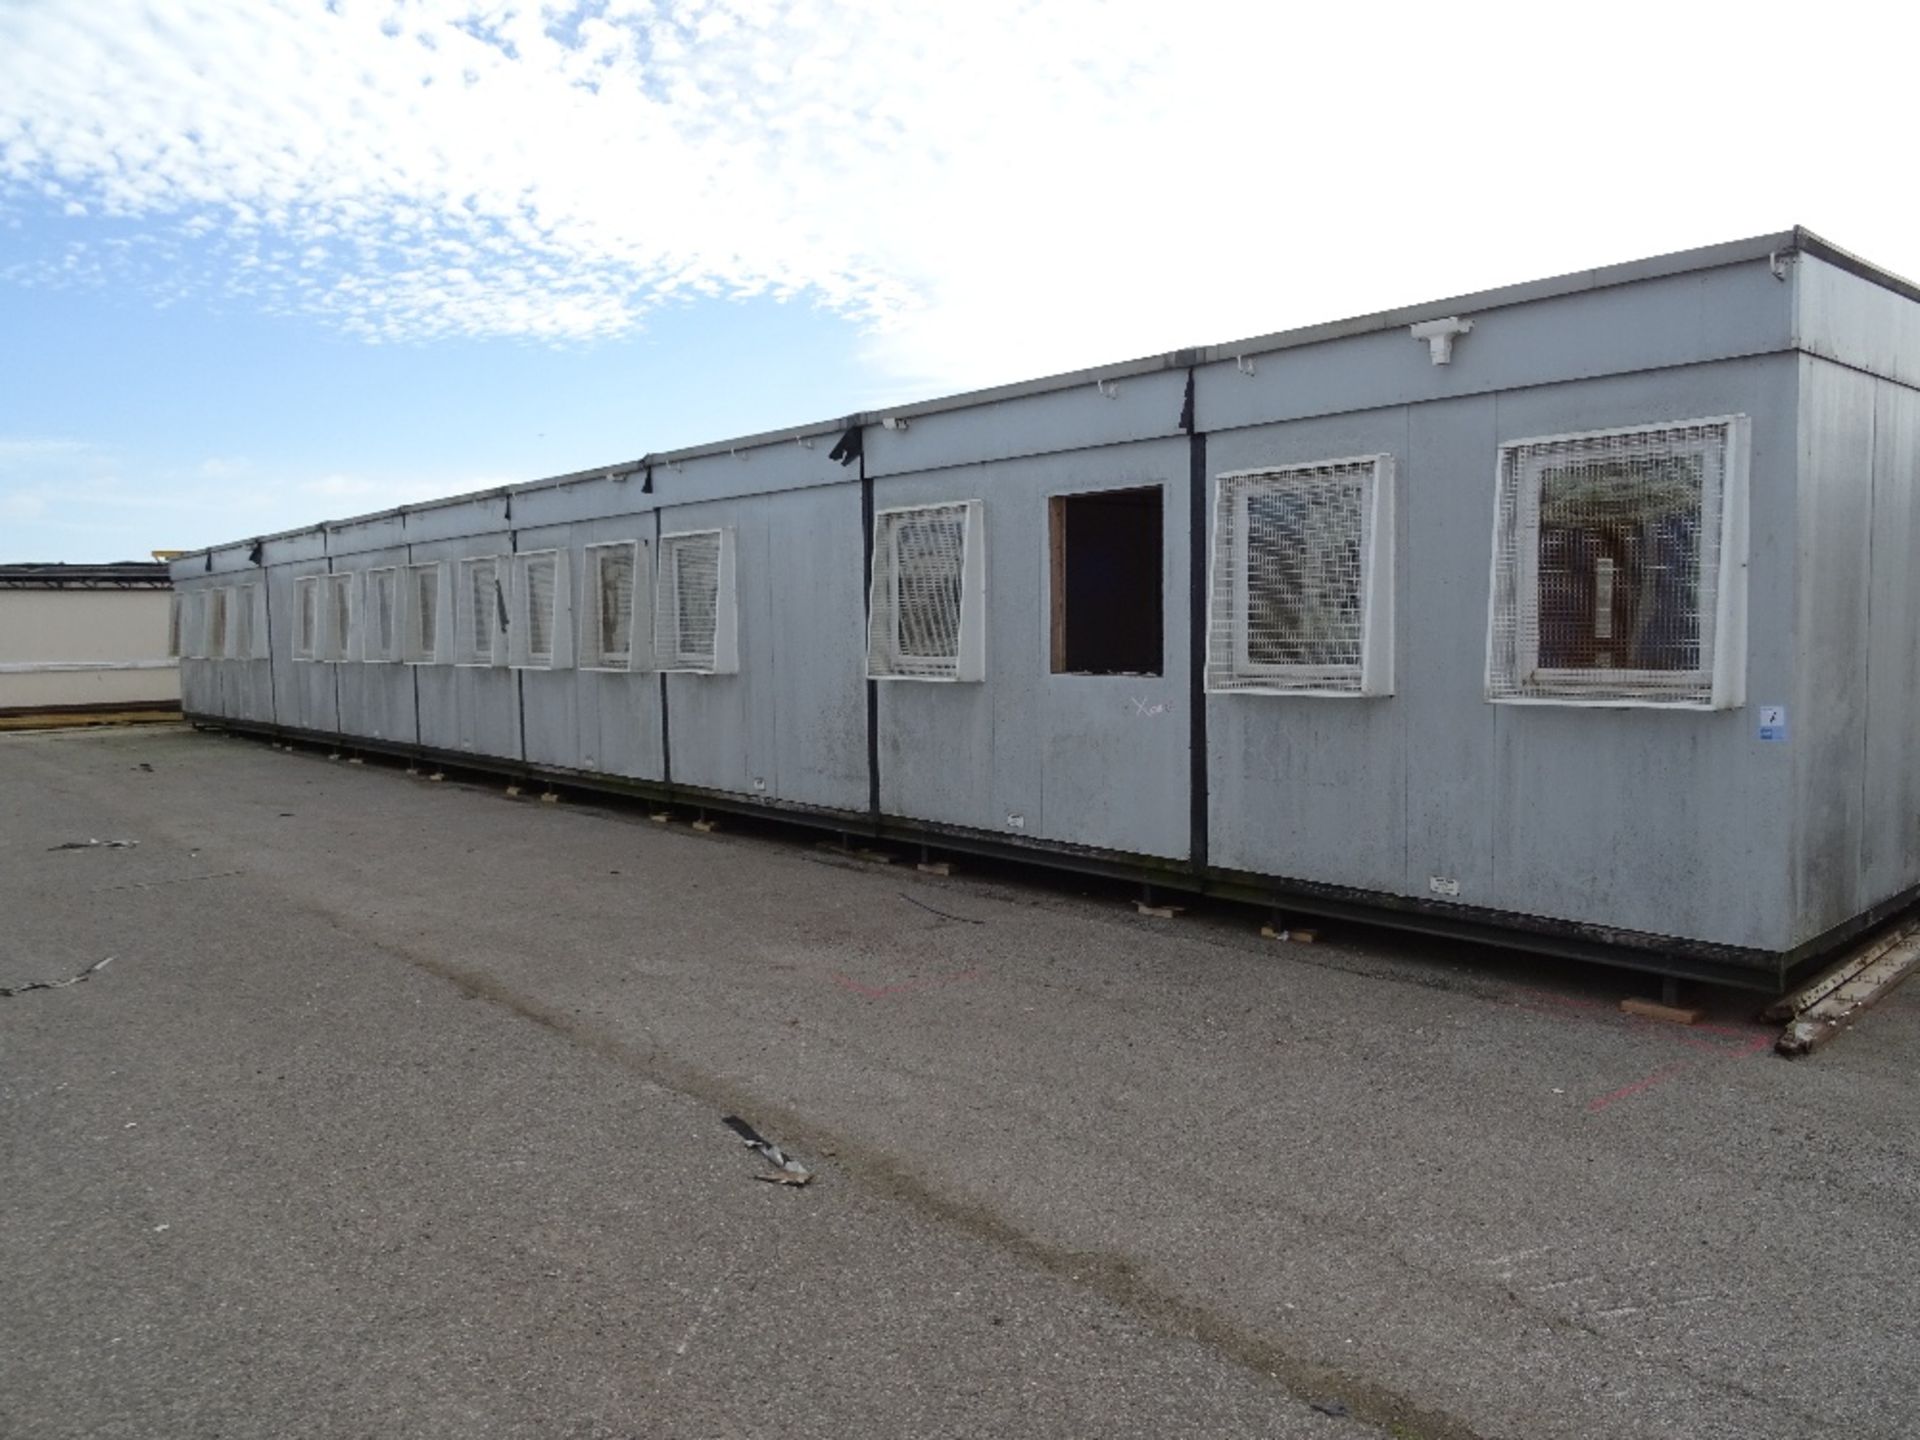 9 Bay Plastisol Single Storey Modular Classroom Building with PVC Windows & Security Grills, 9.6m x - Image 3 of 11